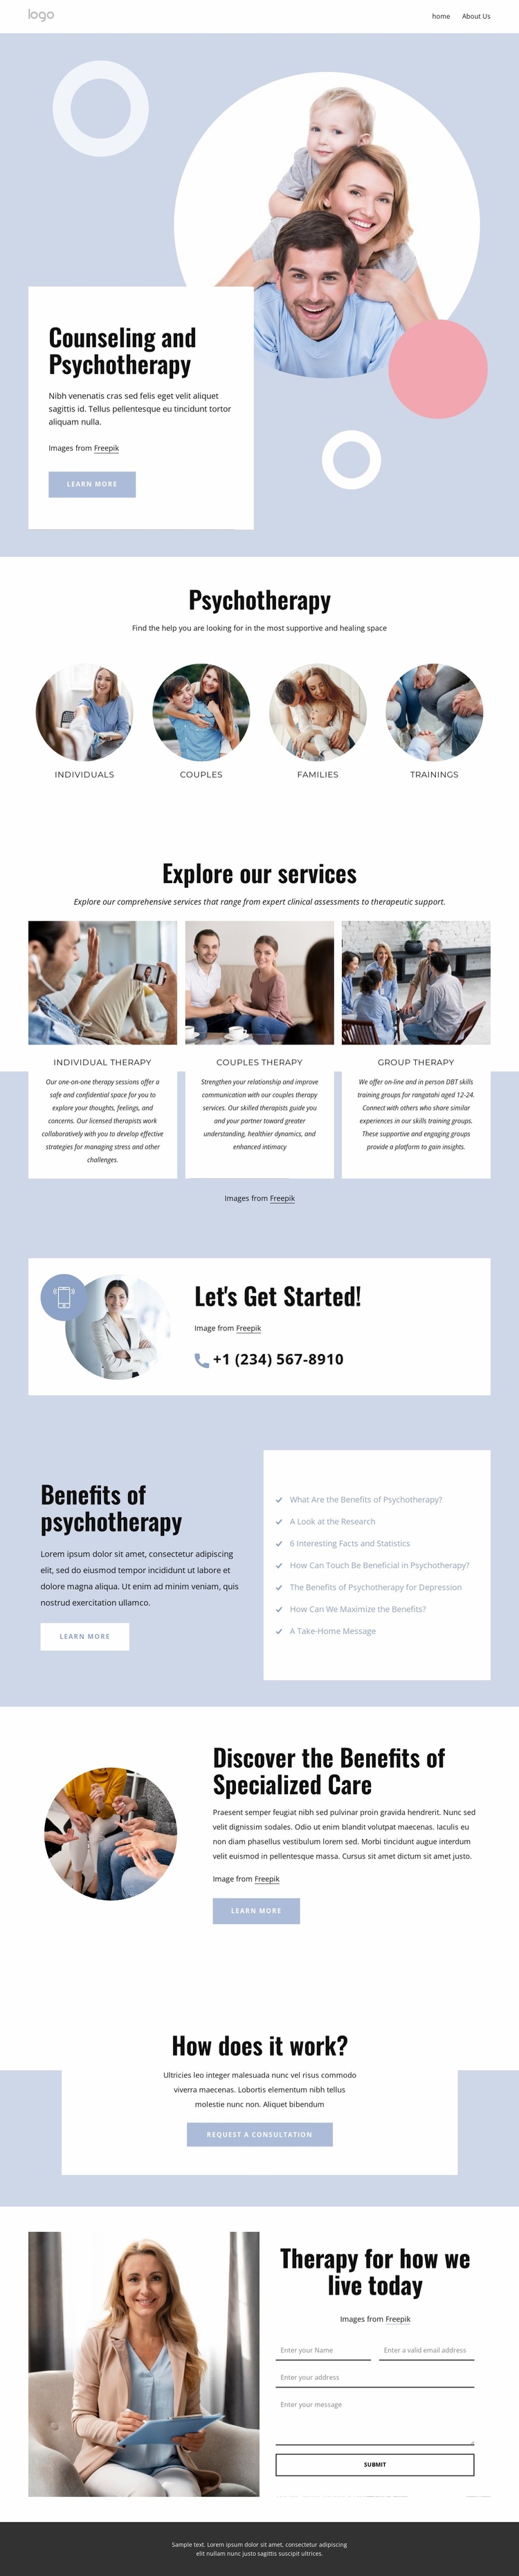 Counseling and psychotherapy Landing Page